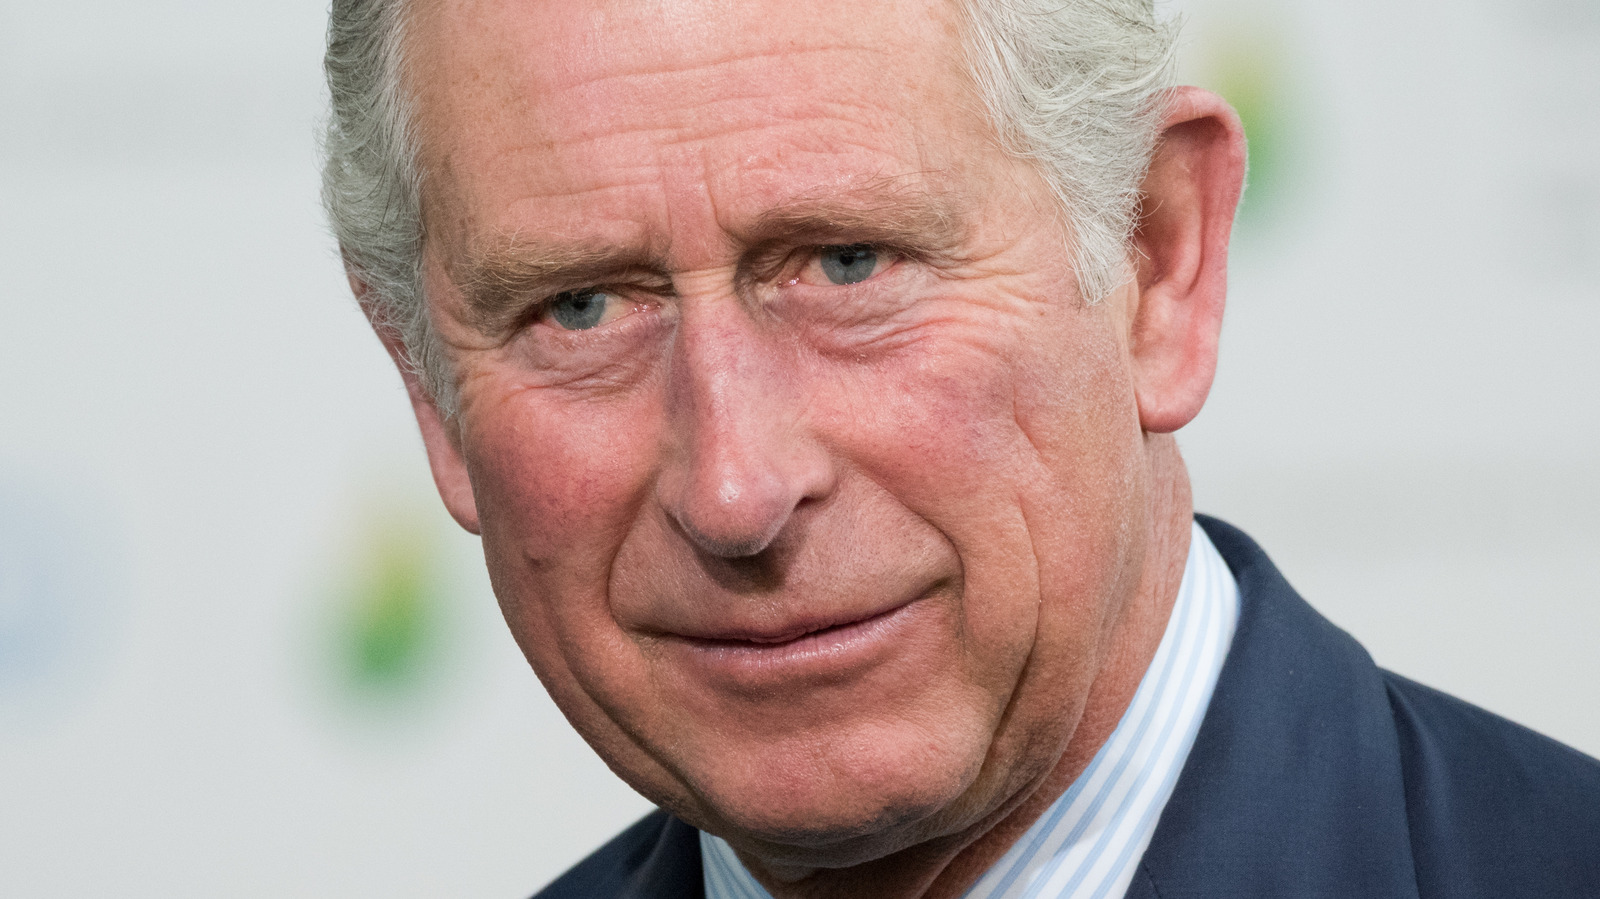 What is Prince Charles' first hurdle before becoming the king?